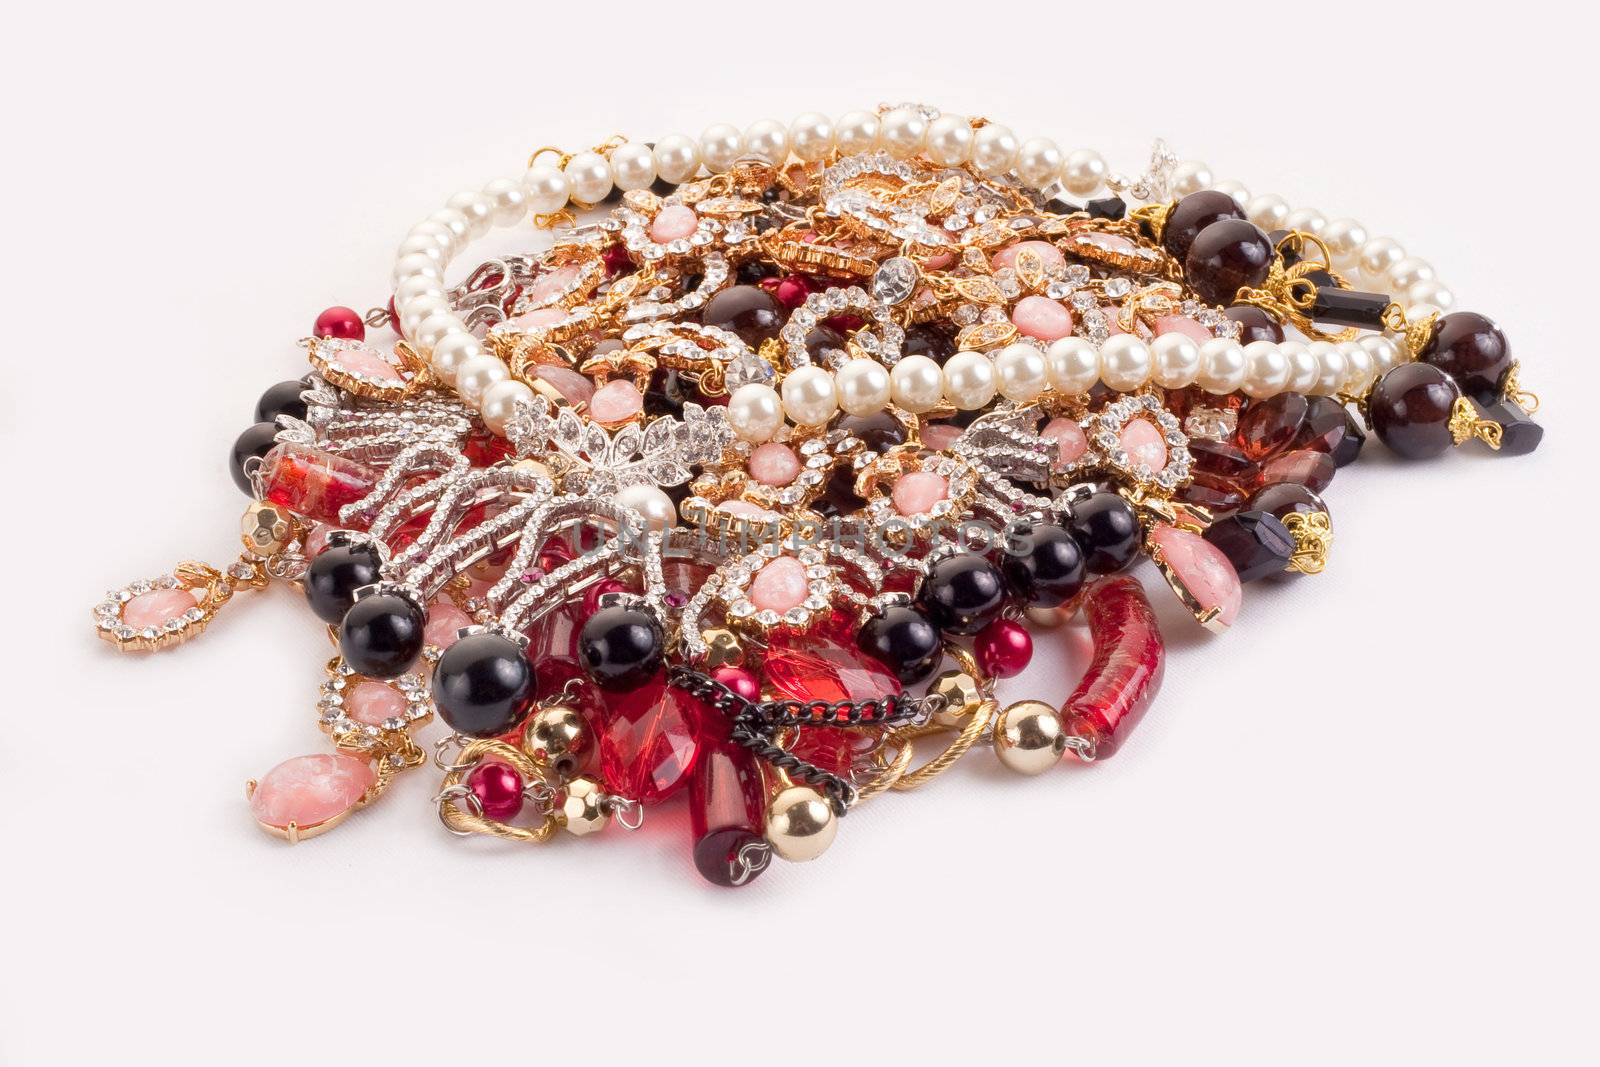 A pile of colored jewellery on white background by igor_stramyk